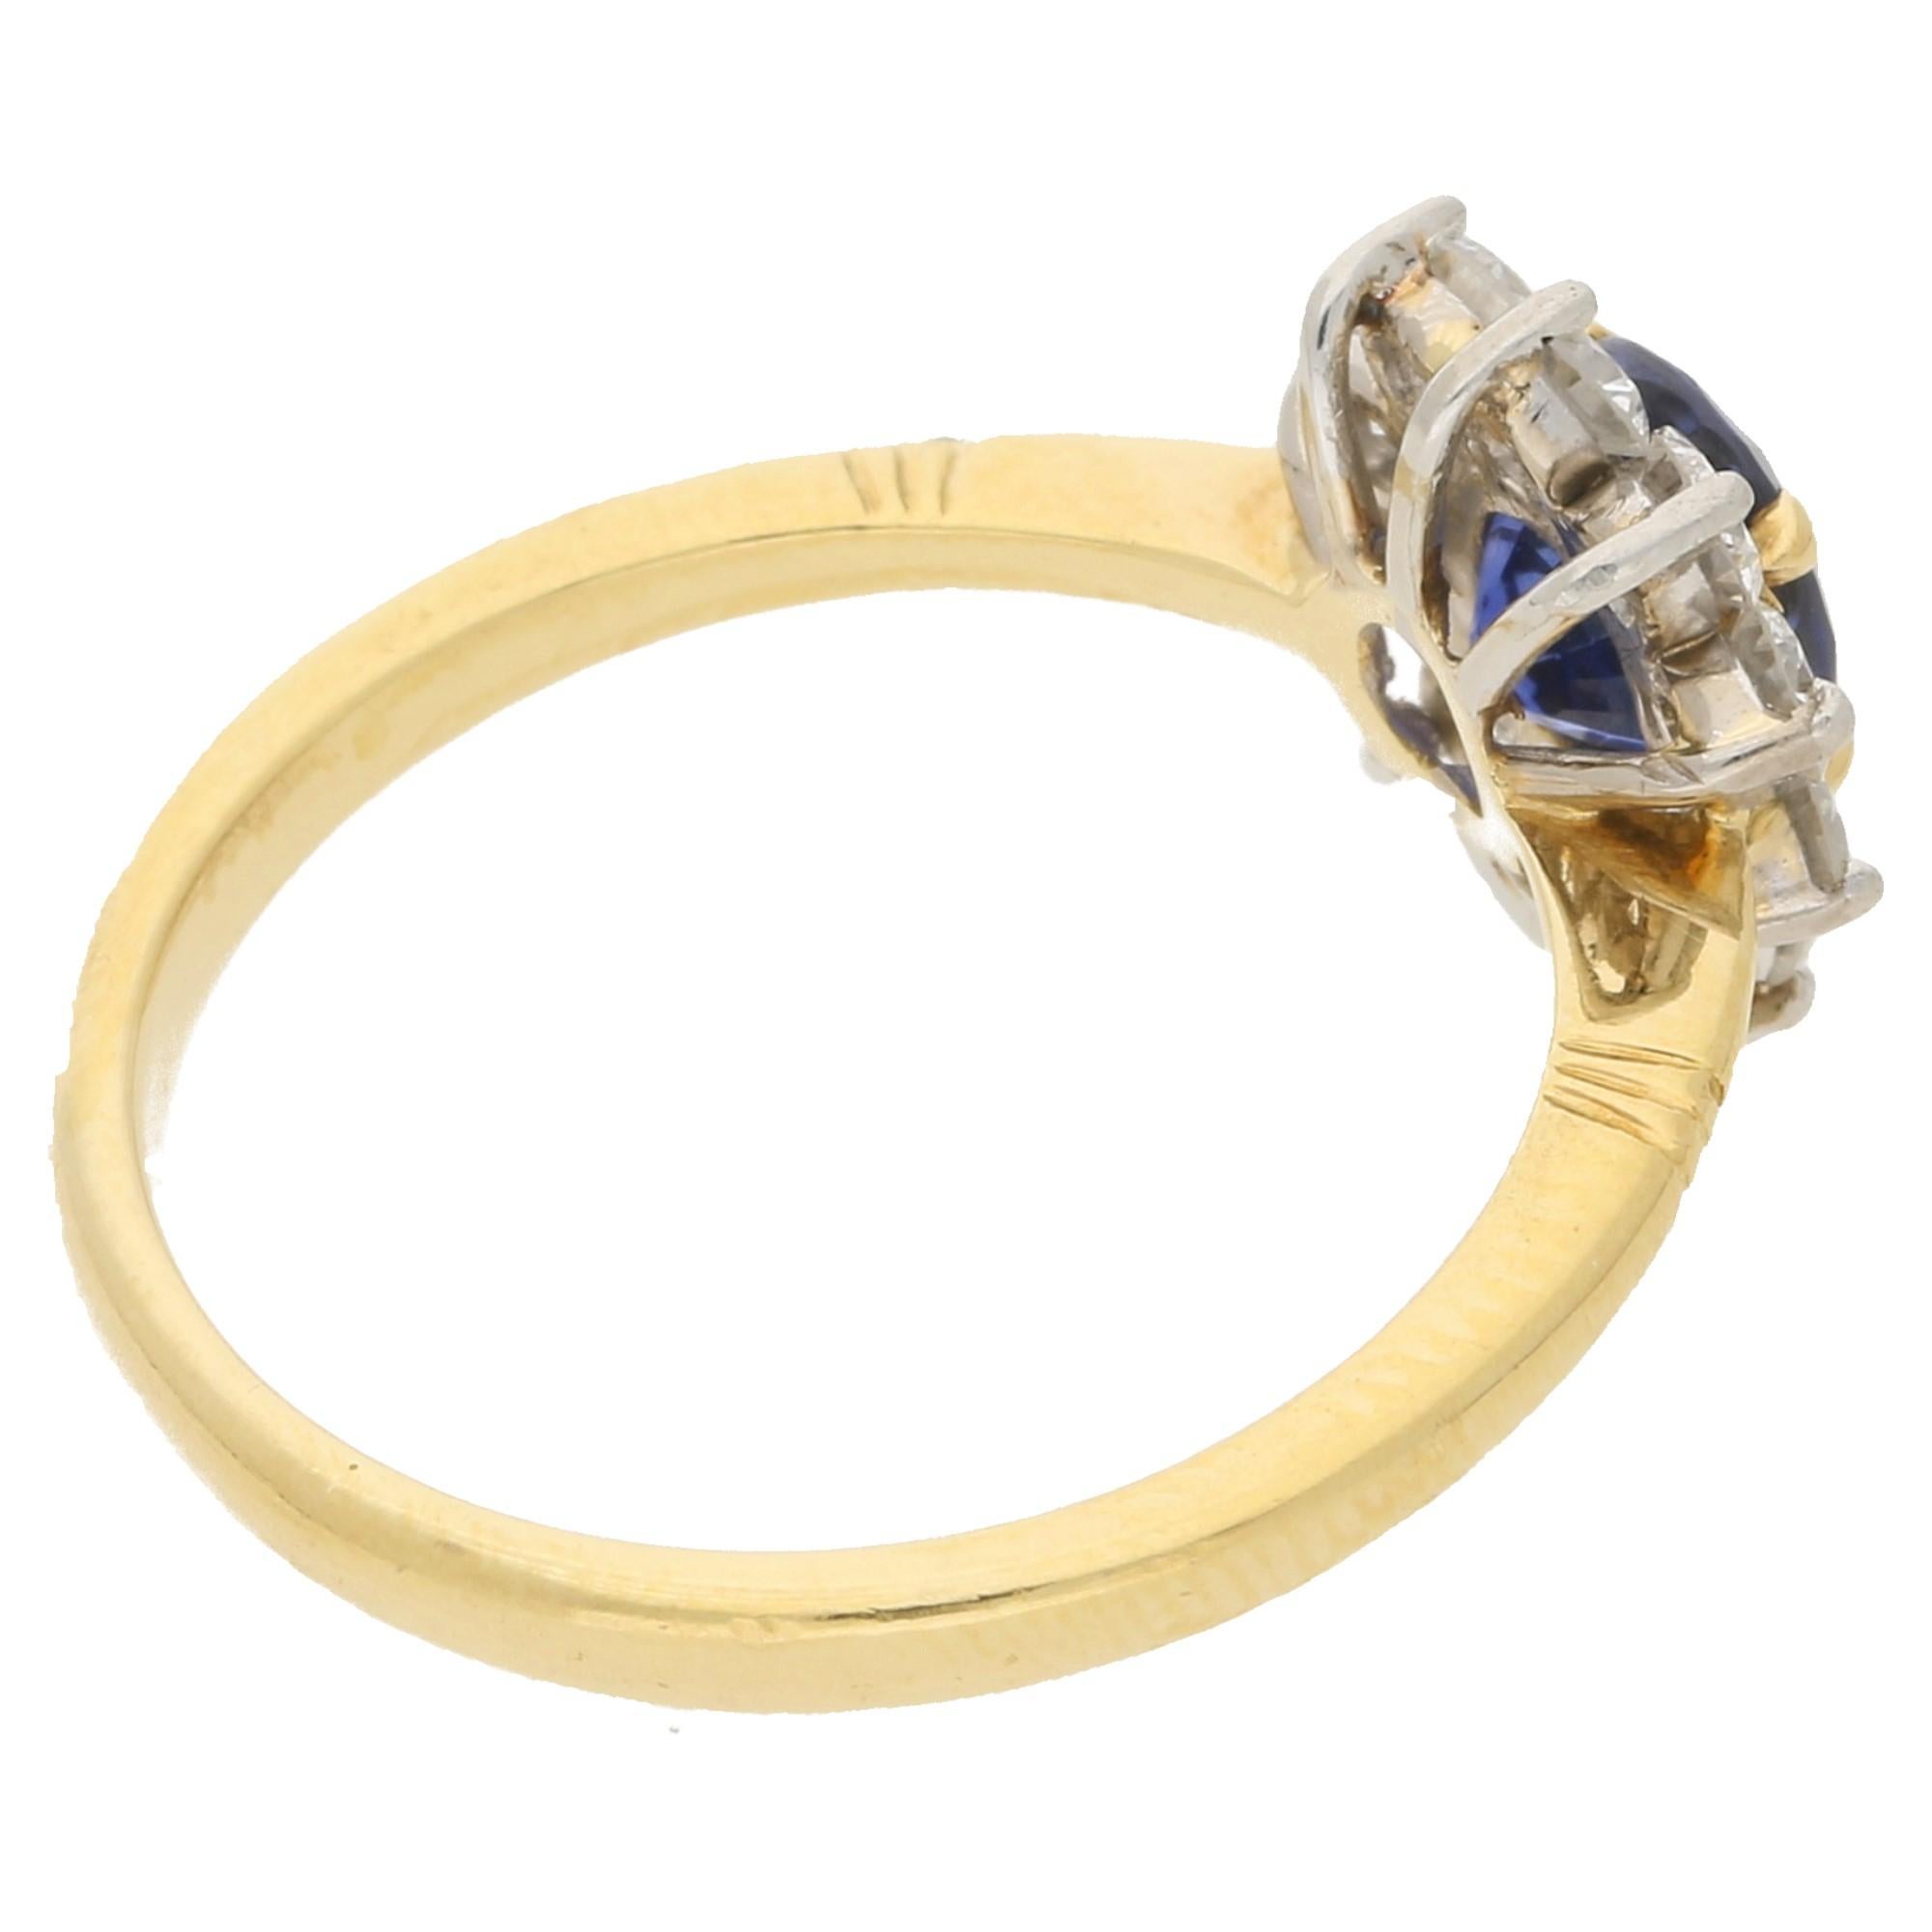 18k mixed gold sapphire and diamond cluster ring, signed Garrard & Co. The ring features a deep blue oval sapphire with 0.89 carats on a yellow gold claw open-back setting, surrounded by a halo of 10 round brilliant-cut diamonds with a combined